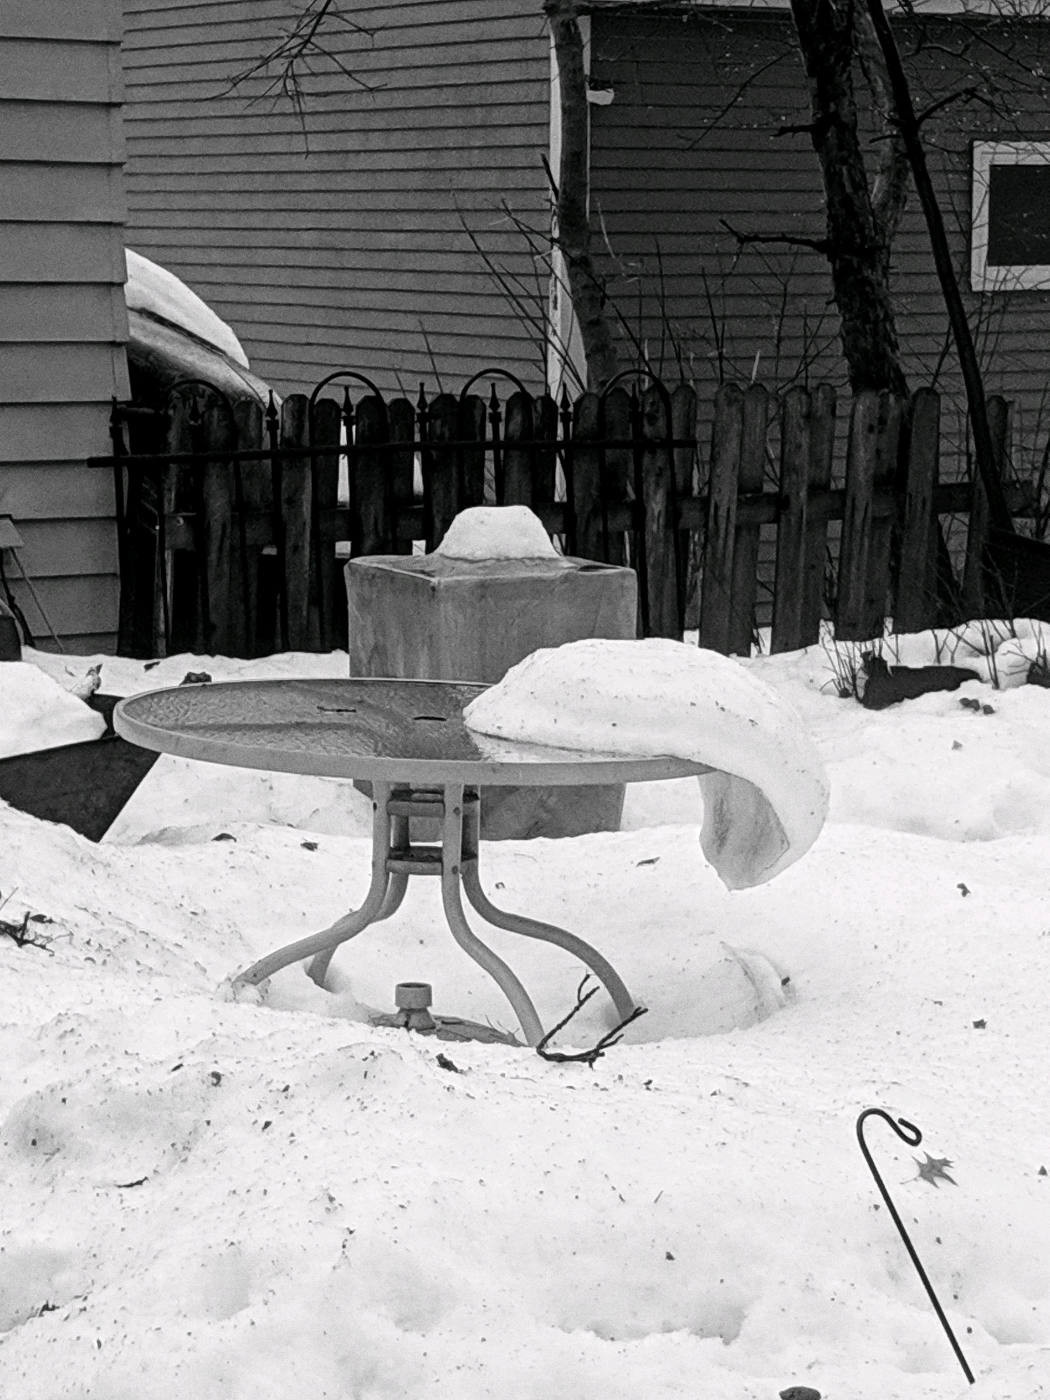 Snow slab sliding off a table in a backyard of snow